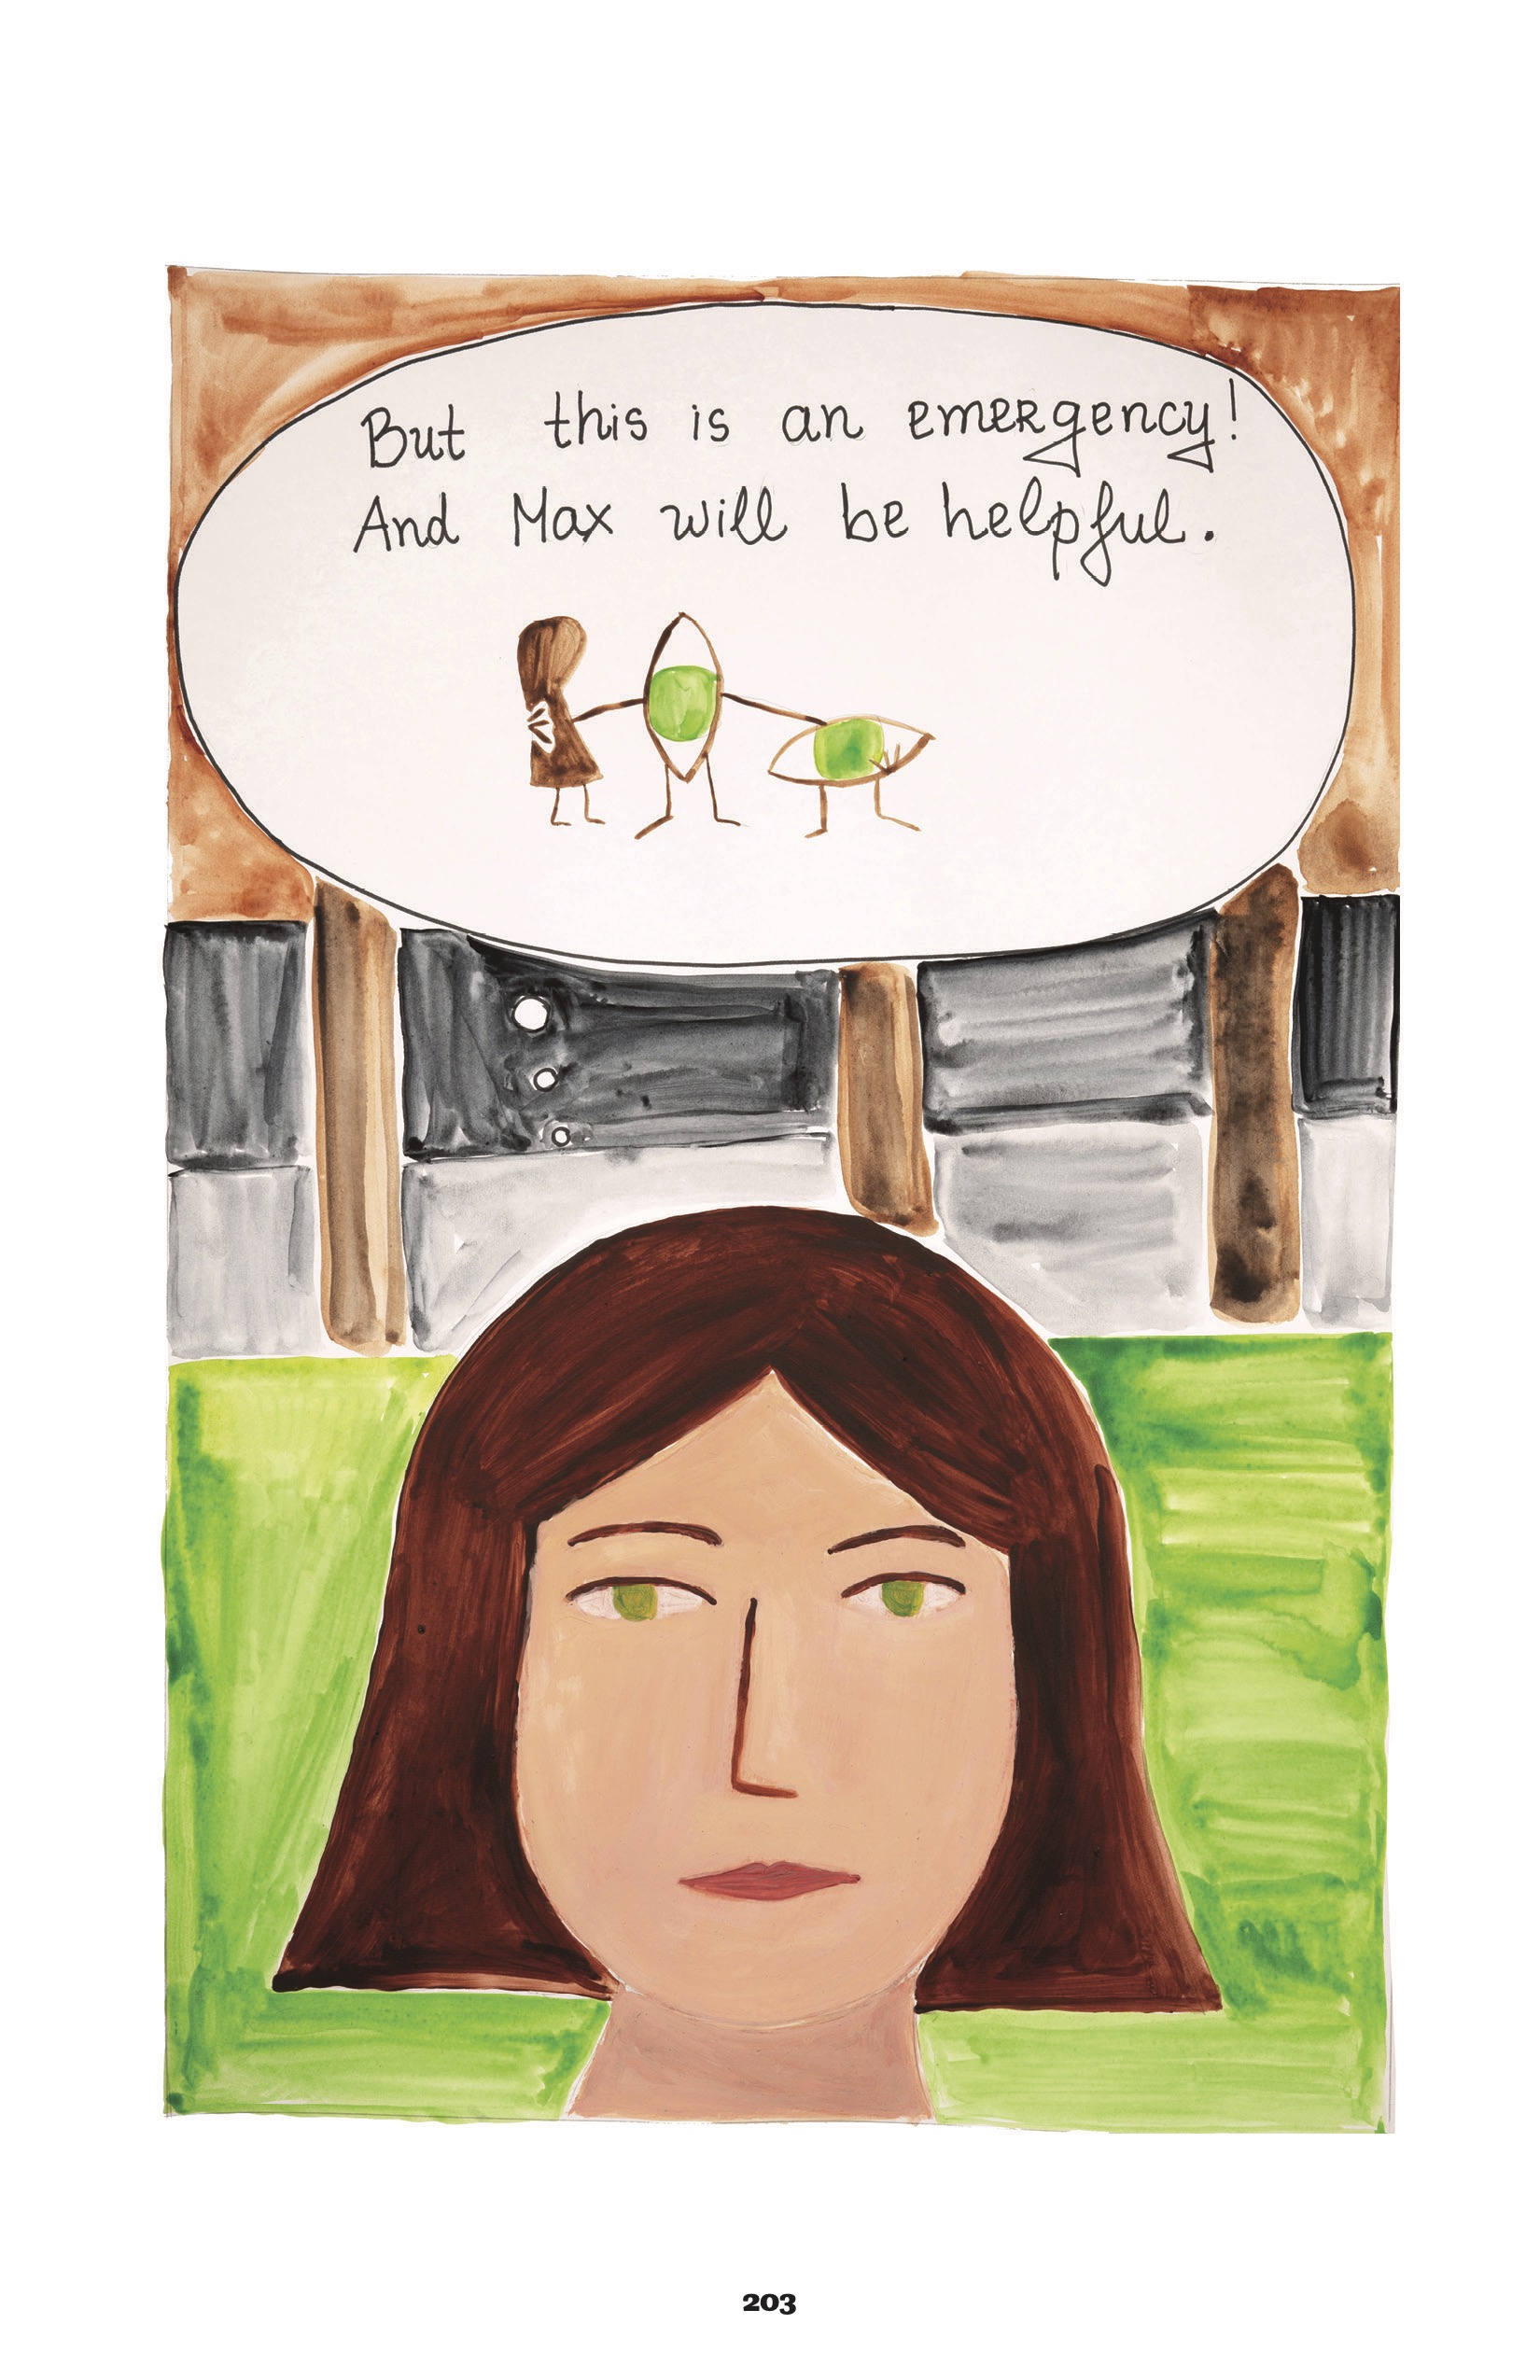 A full page spread in color: Maia is facing the reader with a neutral expression, only visible from the neck up. The background is the grassy field in front of the SPCA building. She is thinking, â€œBut this is an emergency! And Max will be helpful.â€ The same image of the eye and peanut figures in a group embrace is in the thought bubble.